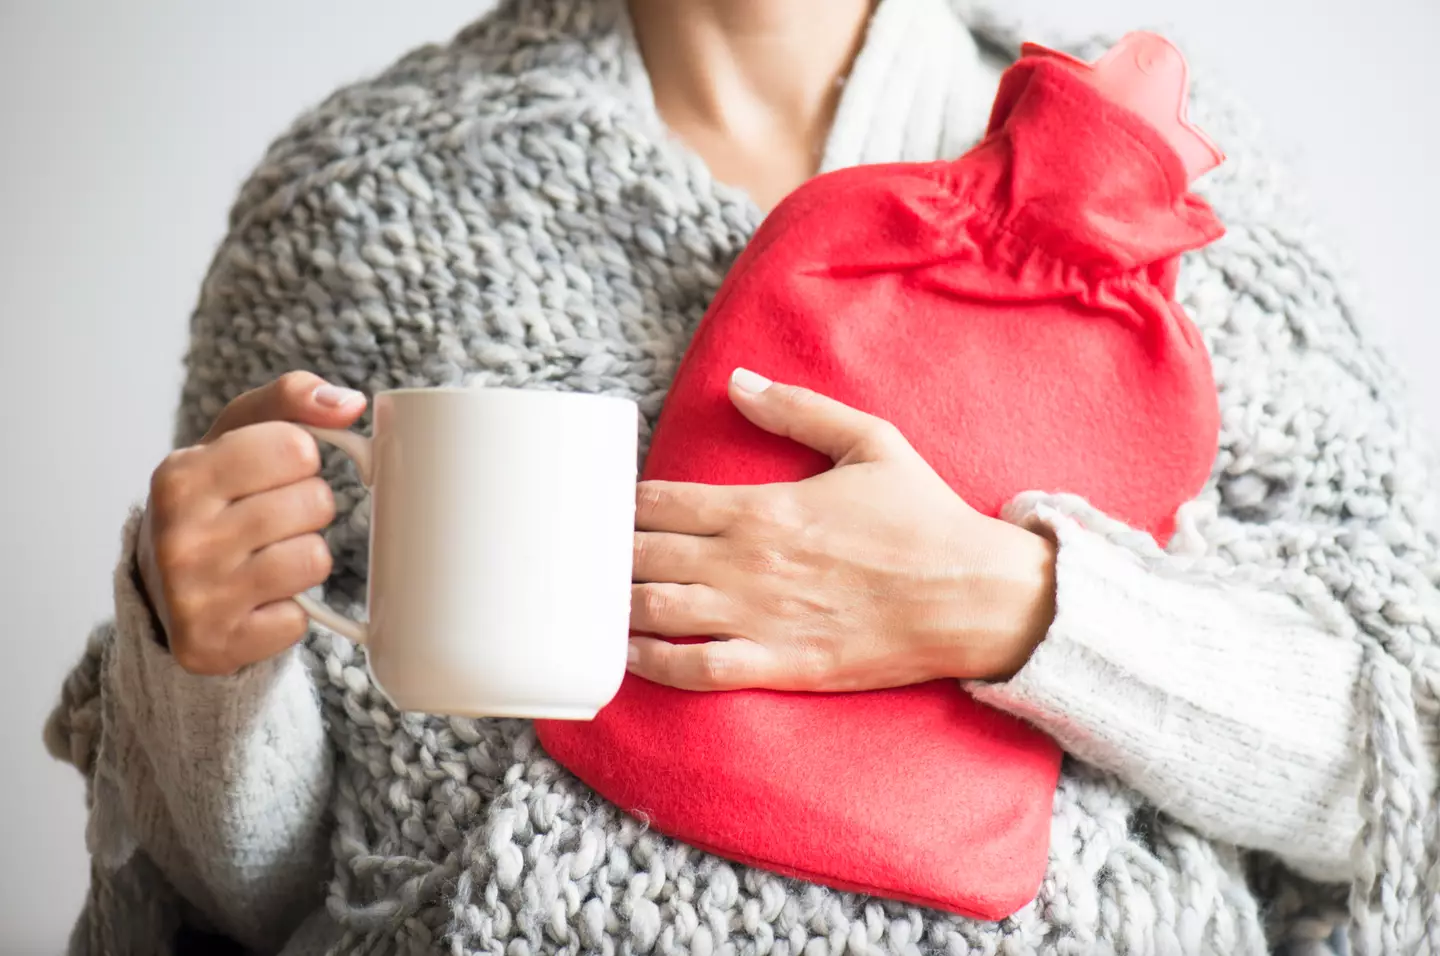 All you need is a hot water bottle for a good night's sleep.